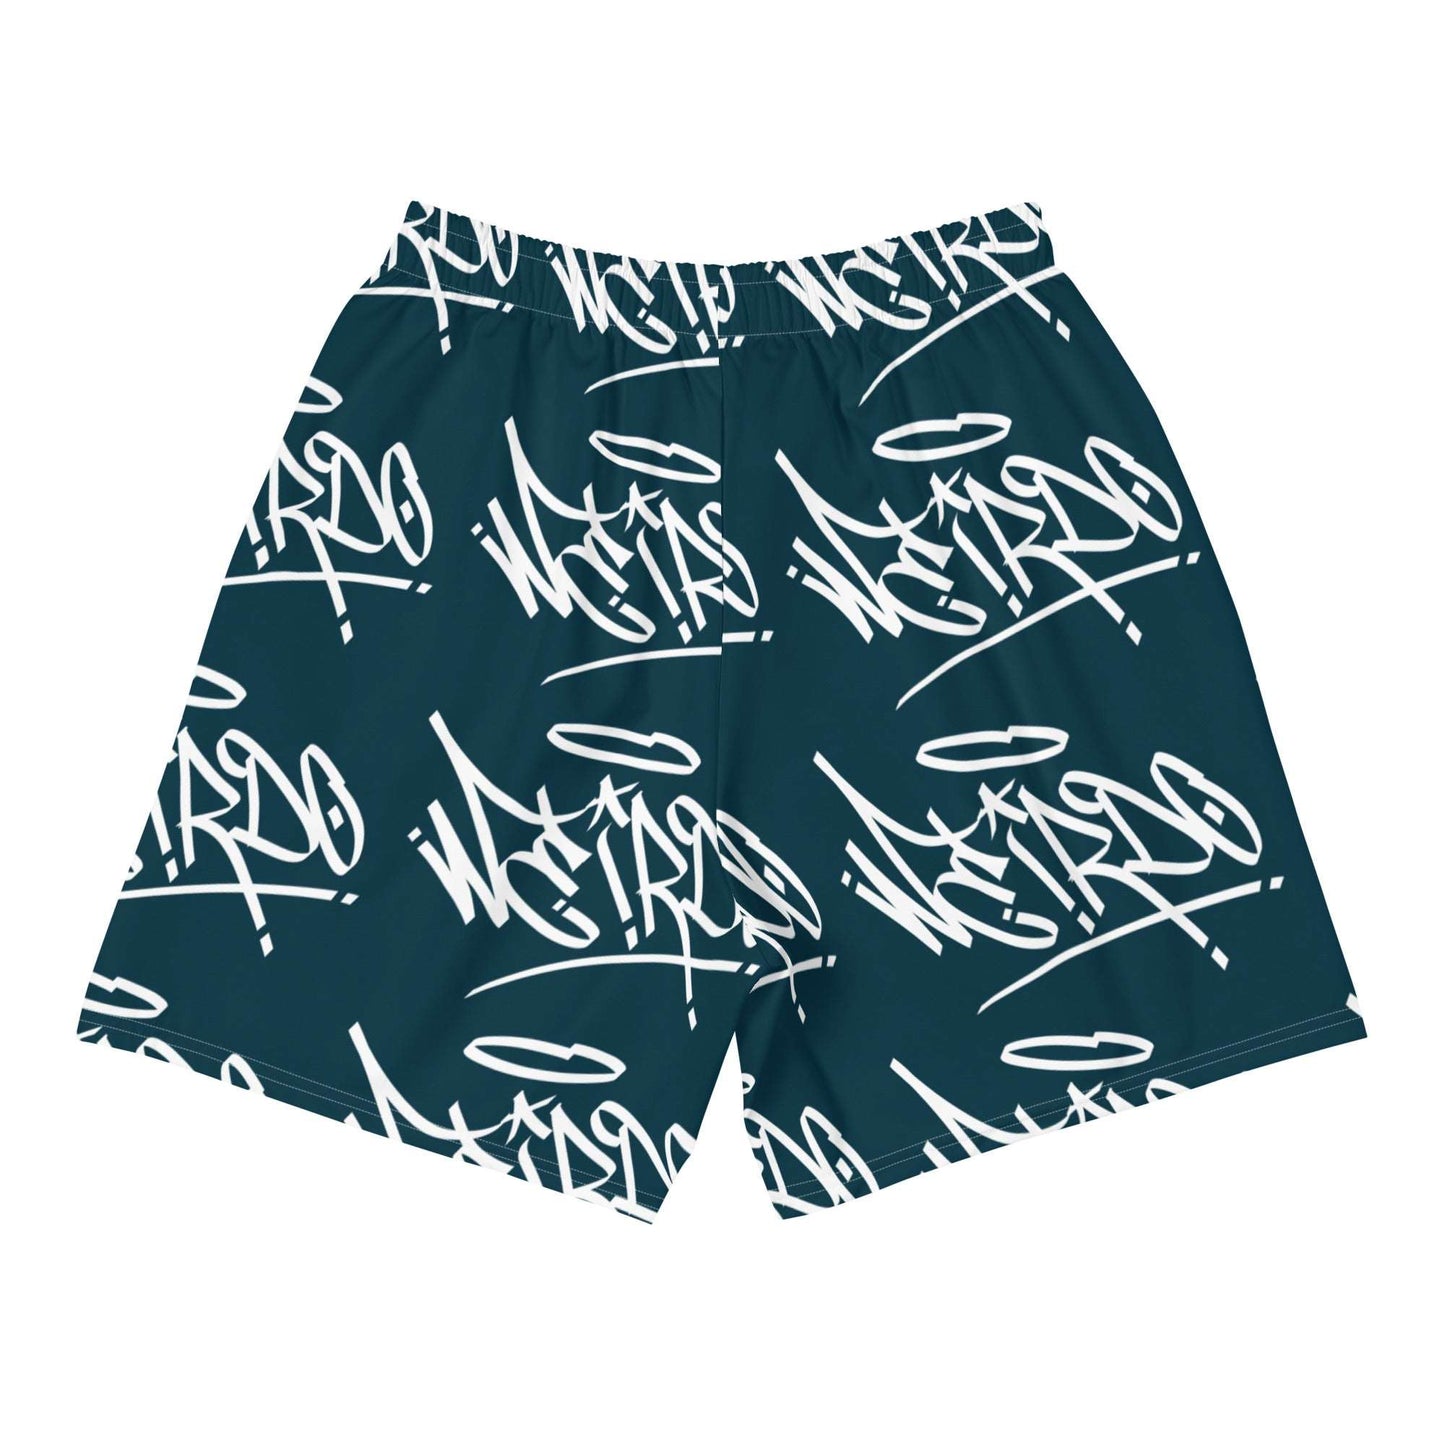 back of weirdo tag shorts navy by B.Different Clothing independent streetwear inspired by street art graffiti